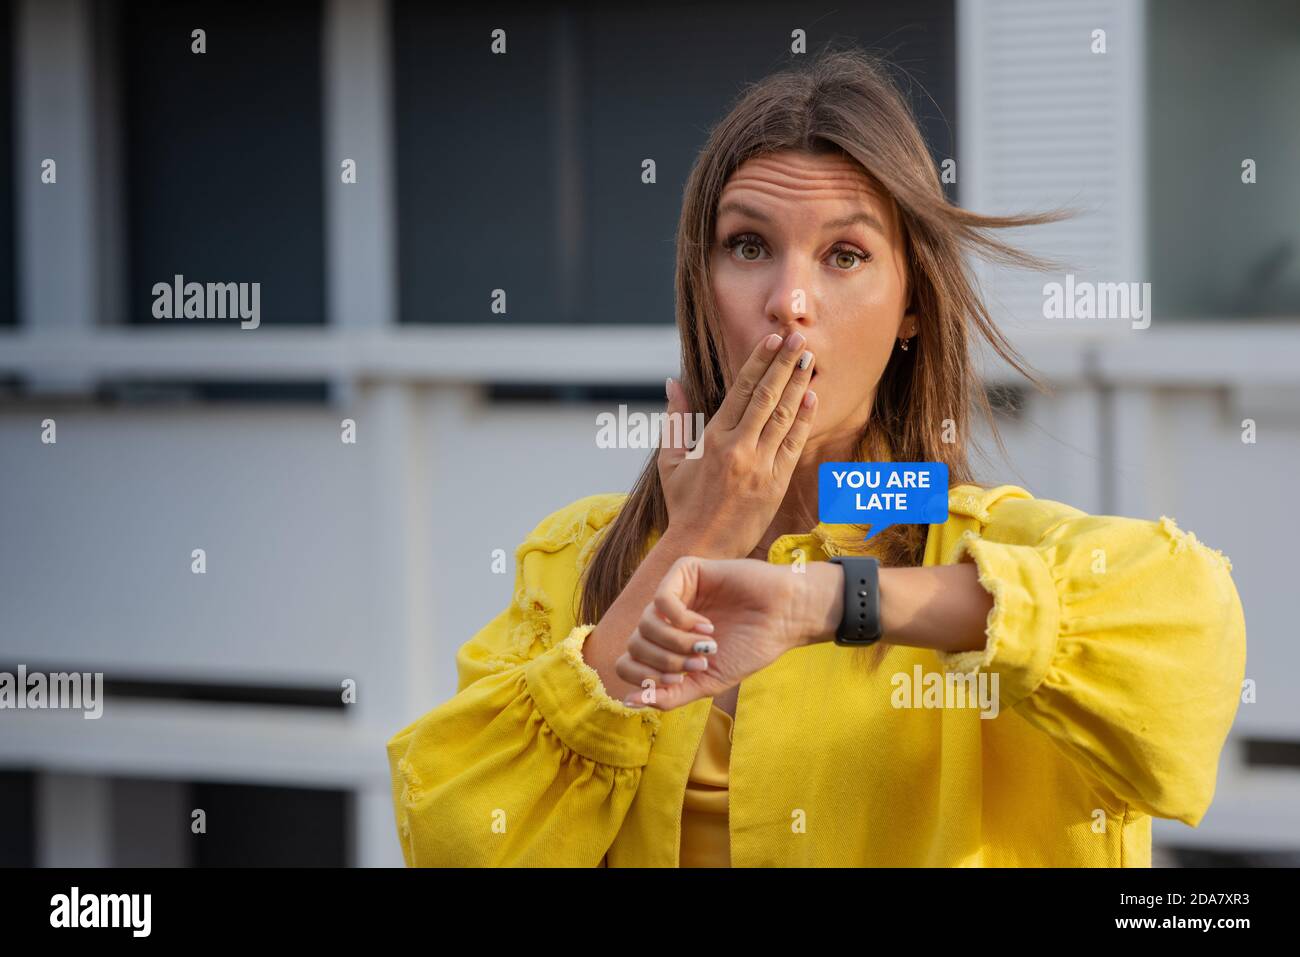 Young woman reading message on a smartwatch and feels shocked because she is late. Forgot about a meeting or workday. Stock Photo